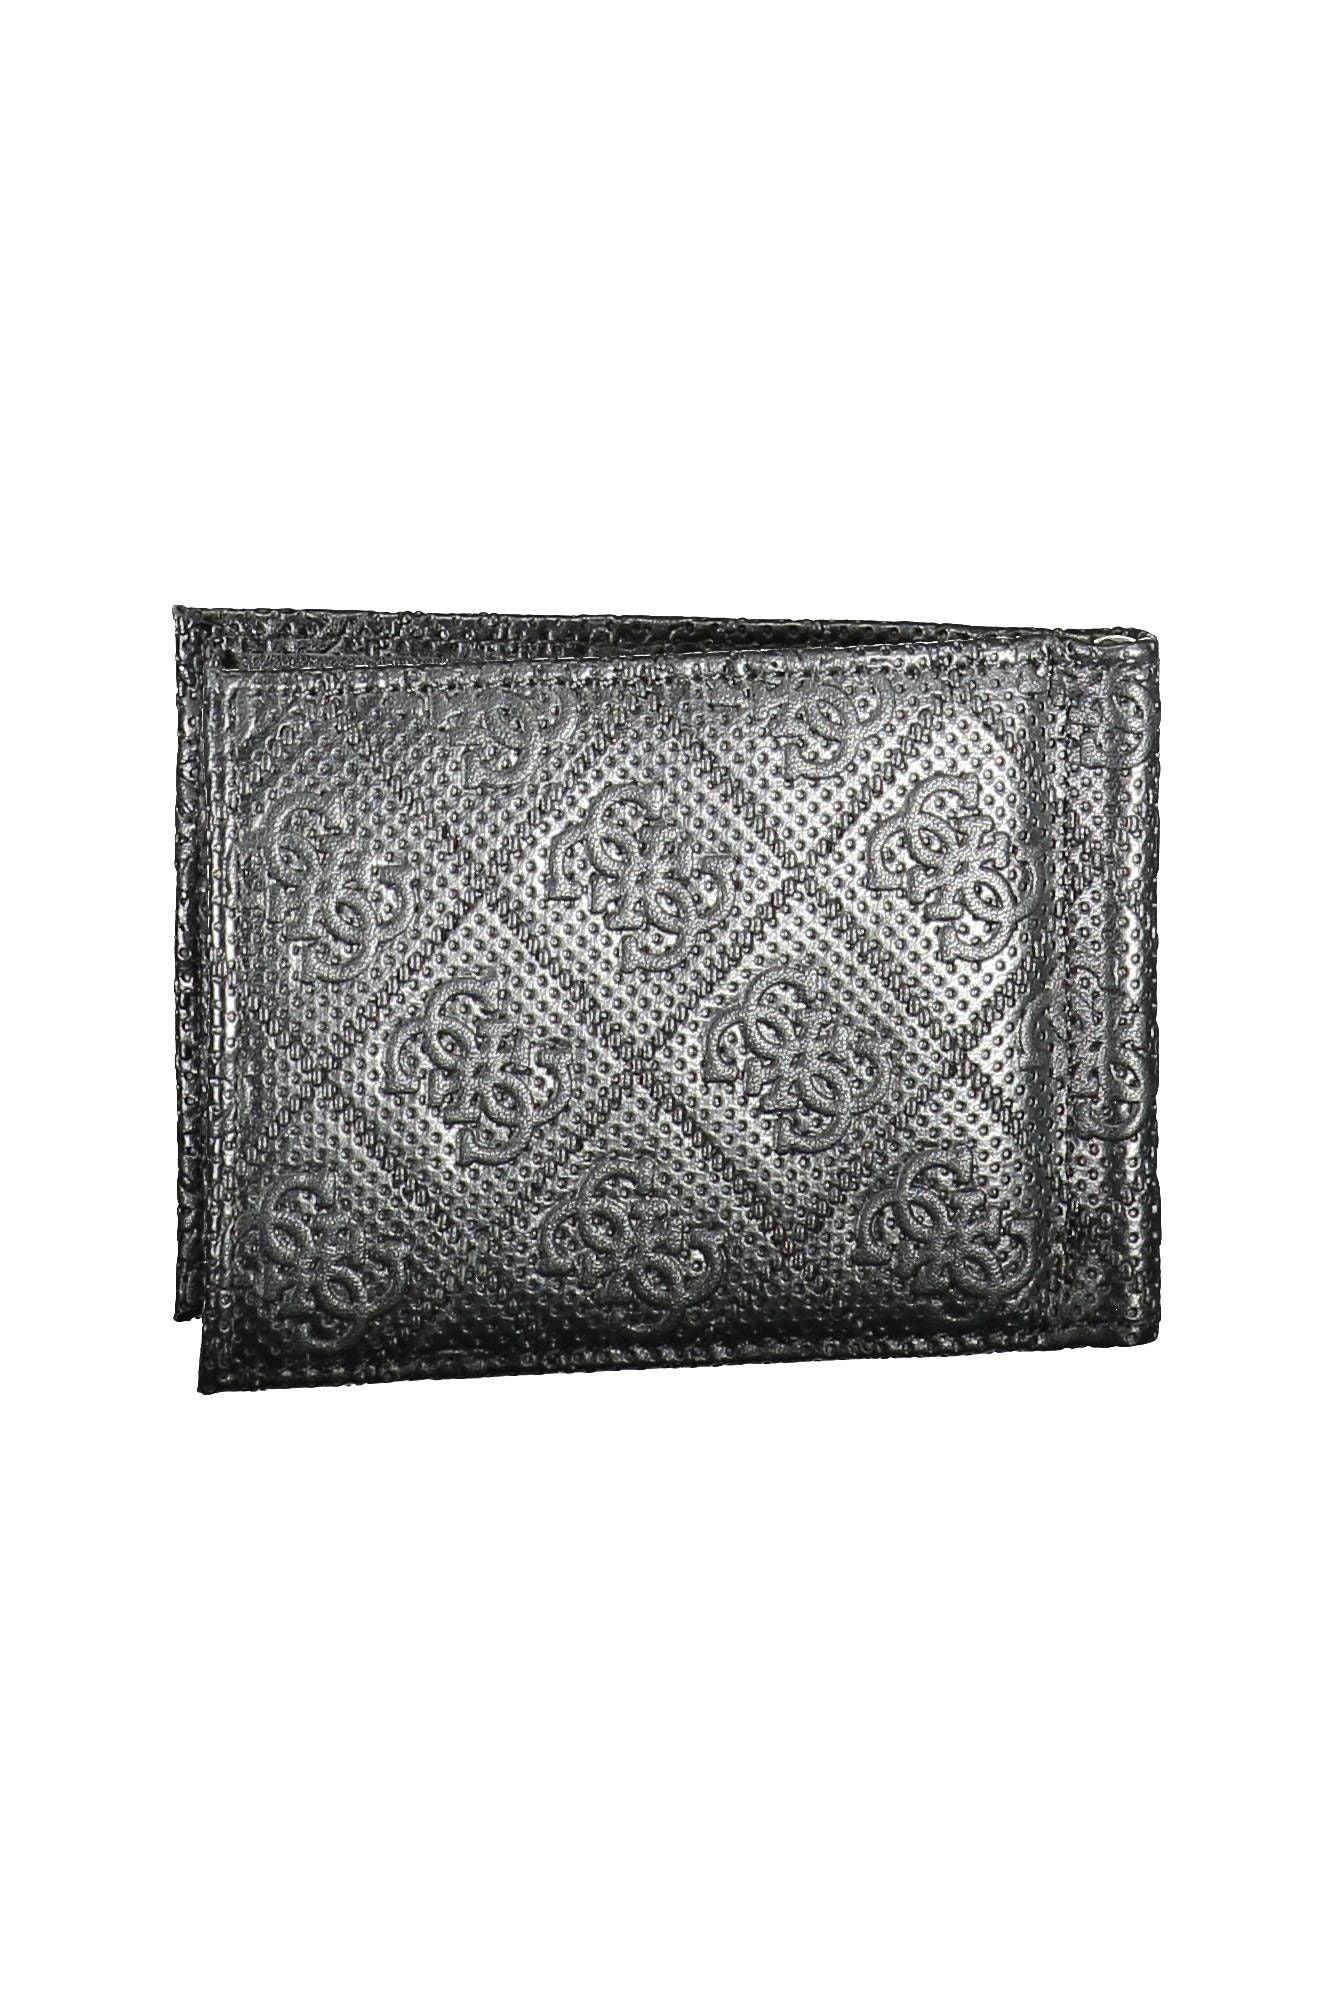 Guess Leather Wallet in Gray for Men